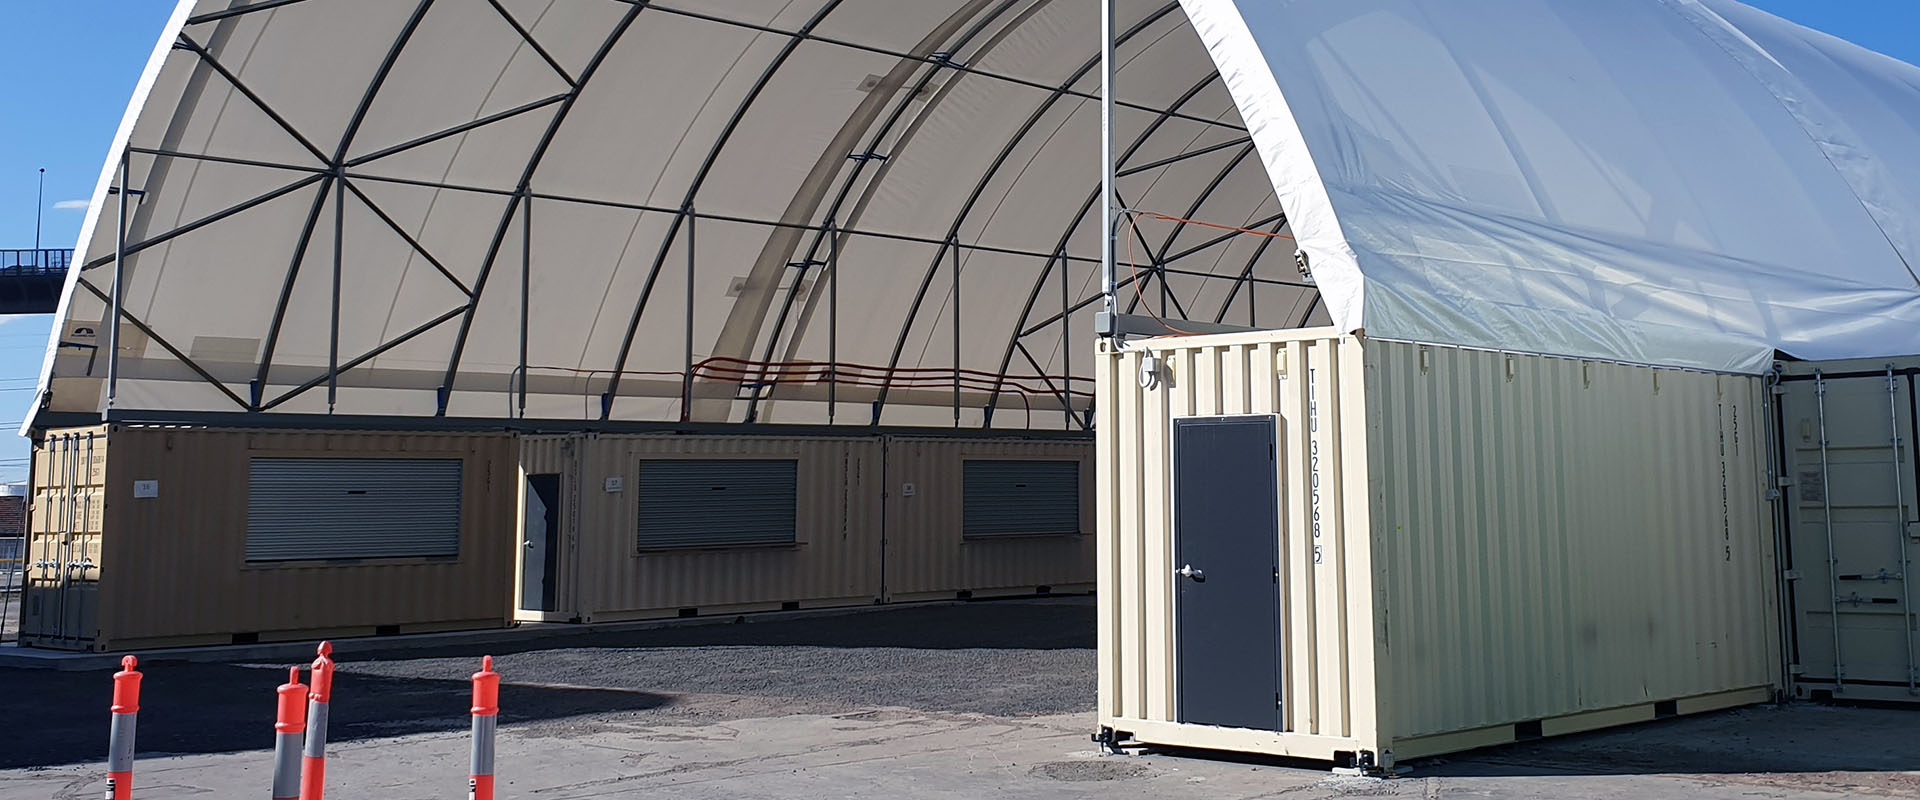 Shipping Container Dome Structure anchored with HULK Earth Anchors for protection against Cyclones and strong winds.